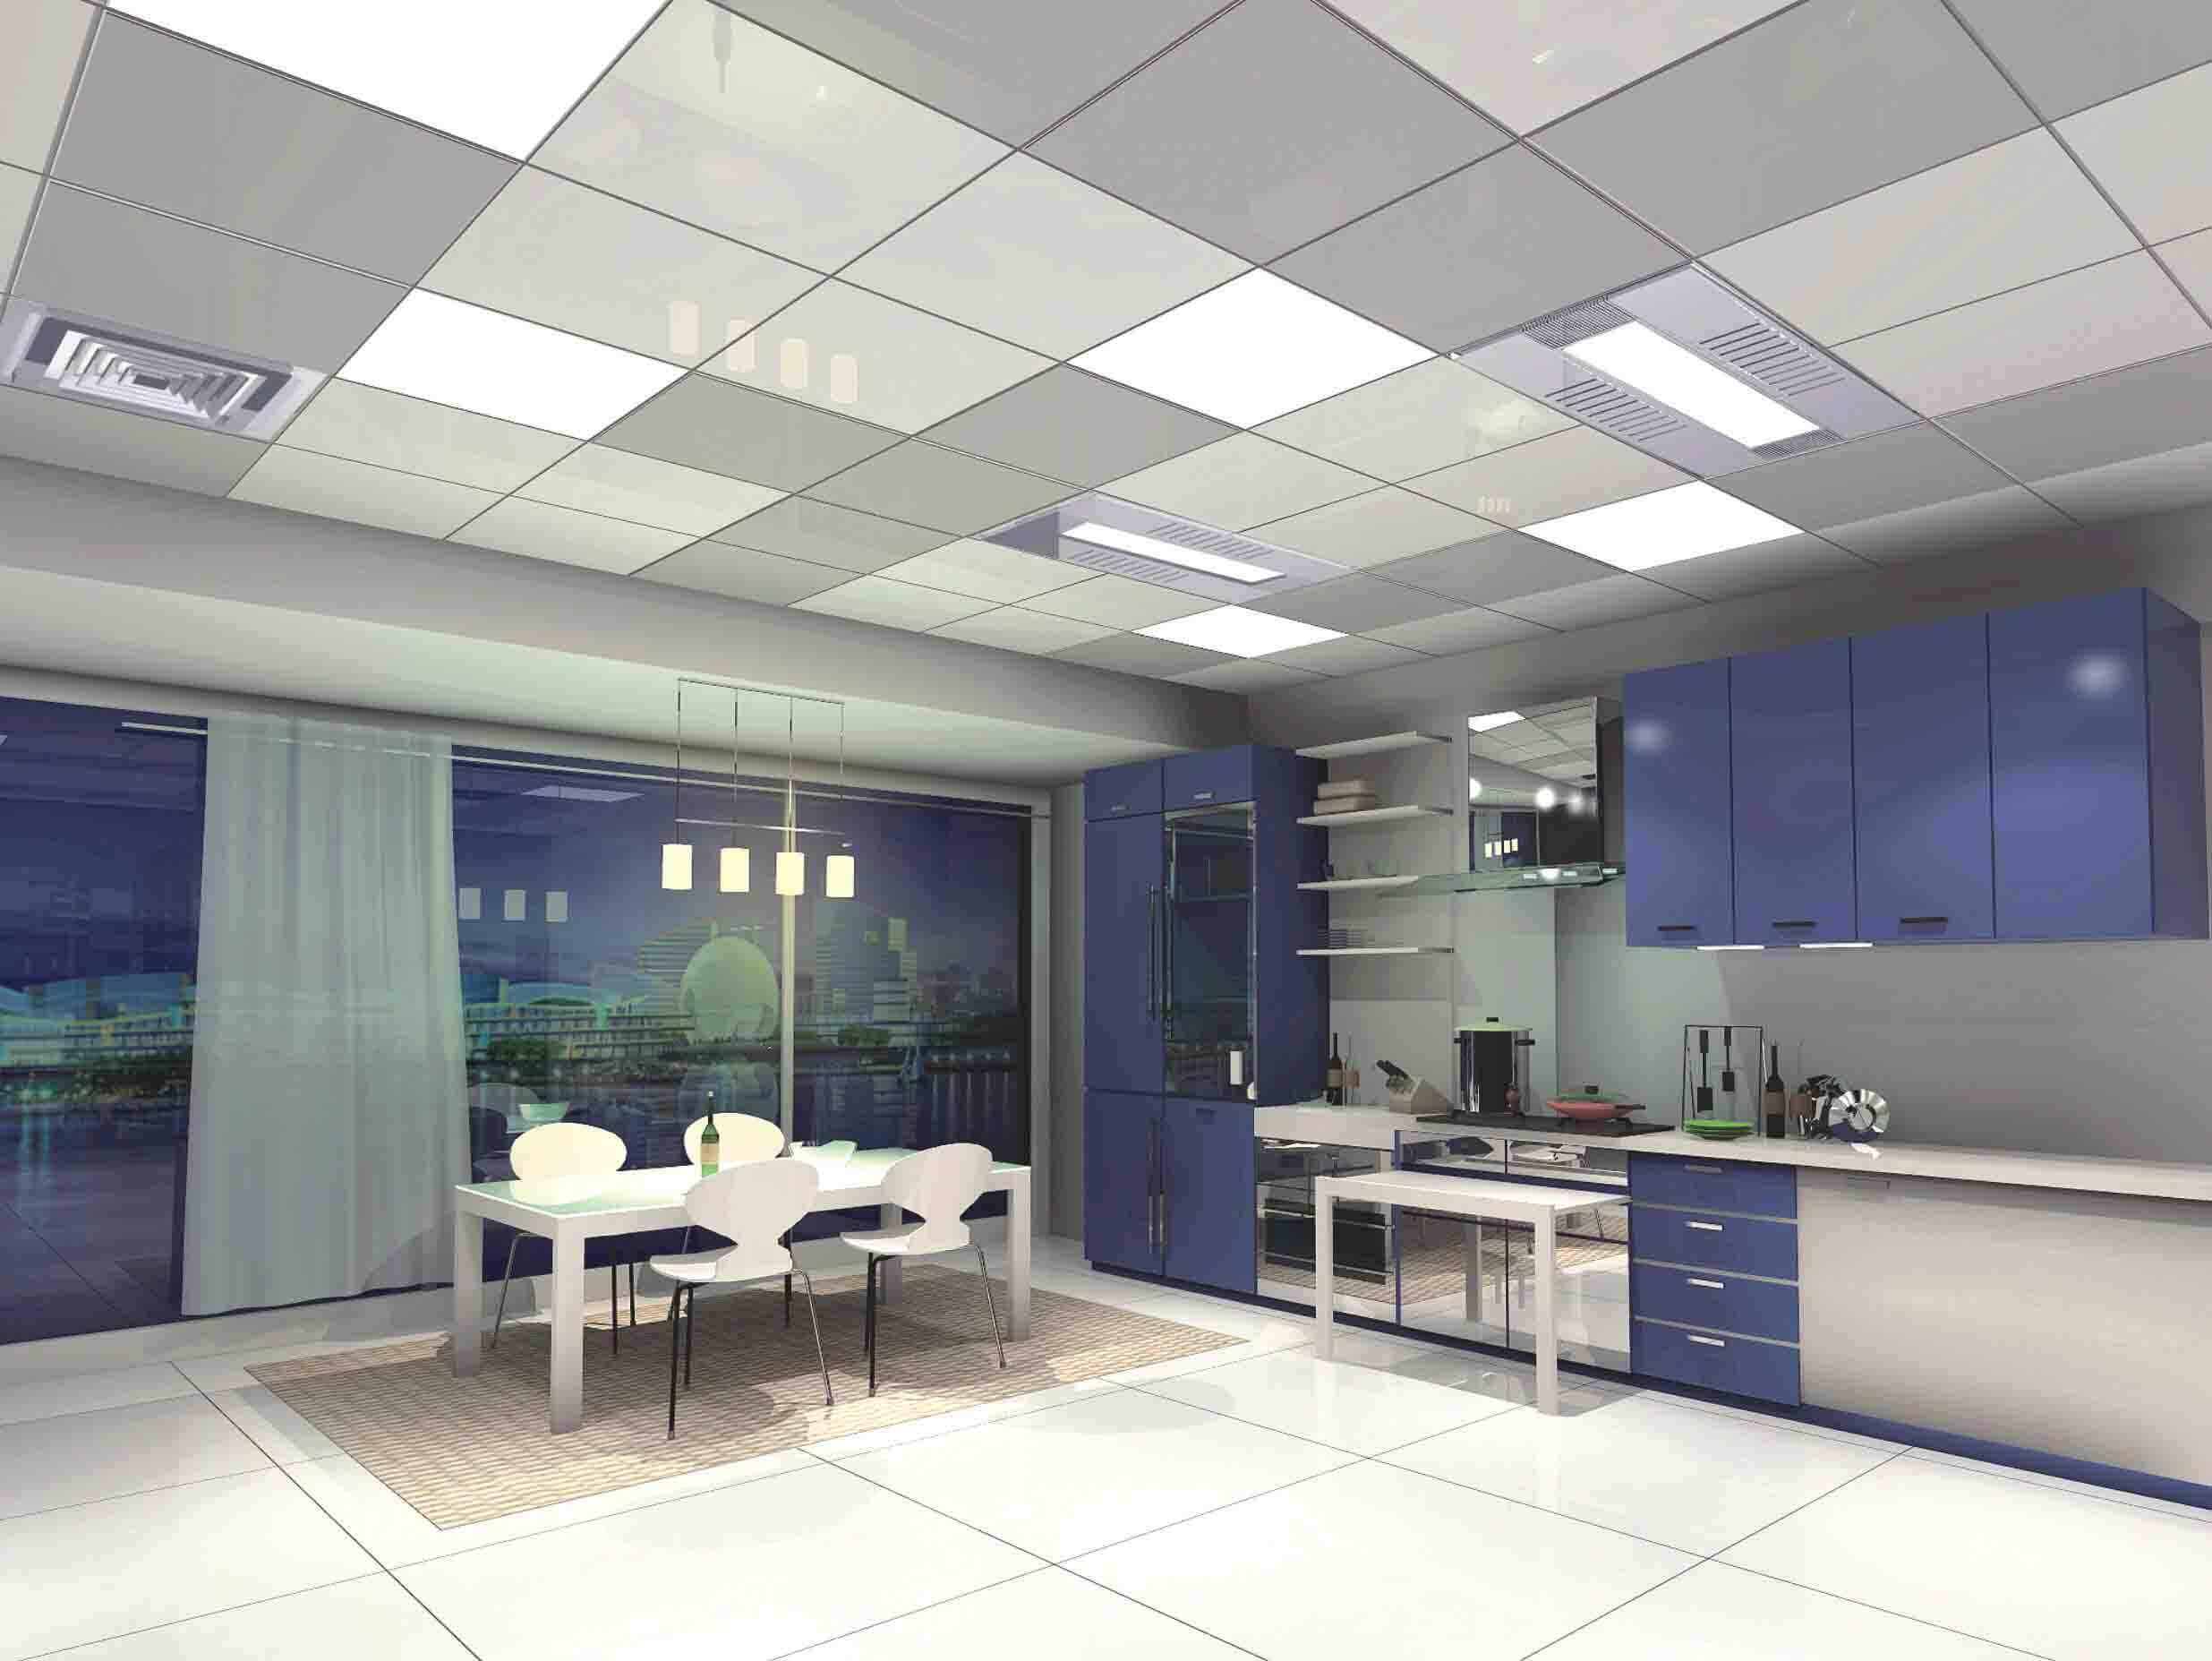 How about the interior ceiling decoration effect of aluminum clip in ceiling?